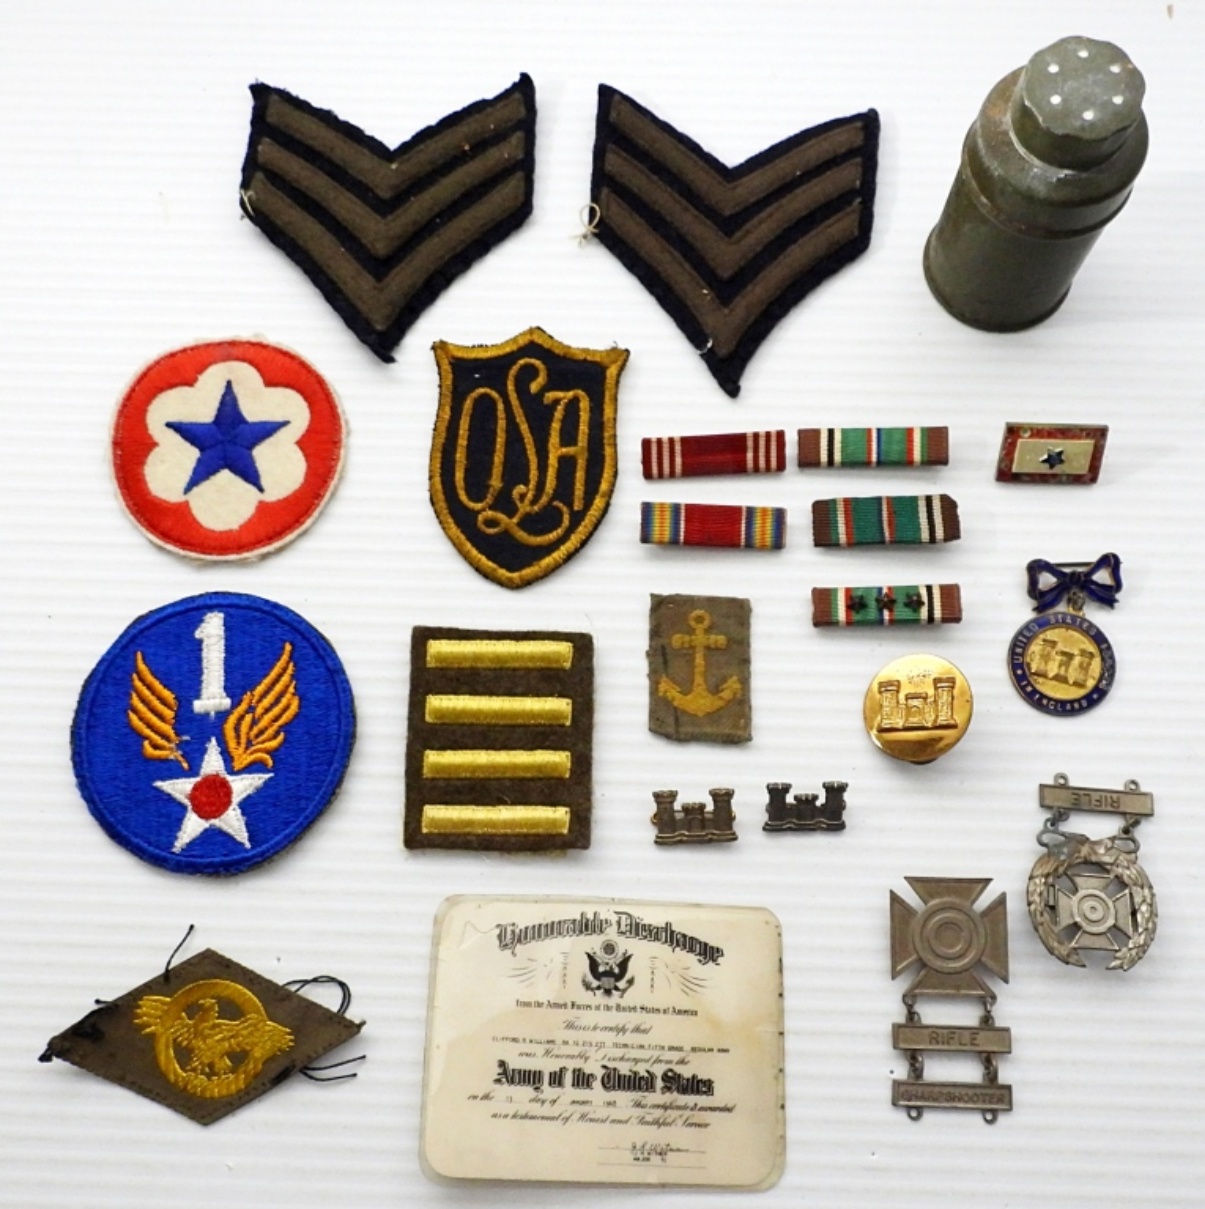 VINTAGE PINS & RIBBONS & MILITARY ITEMS - GREAT MIX